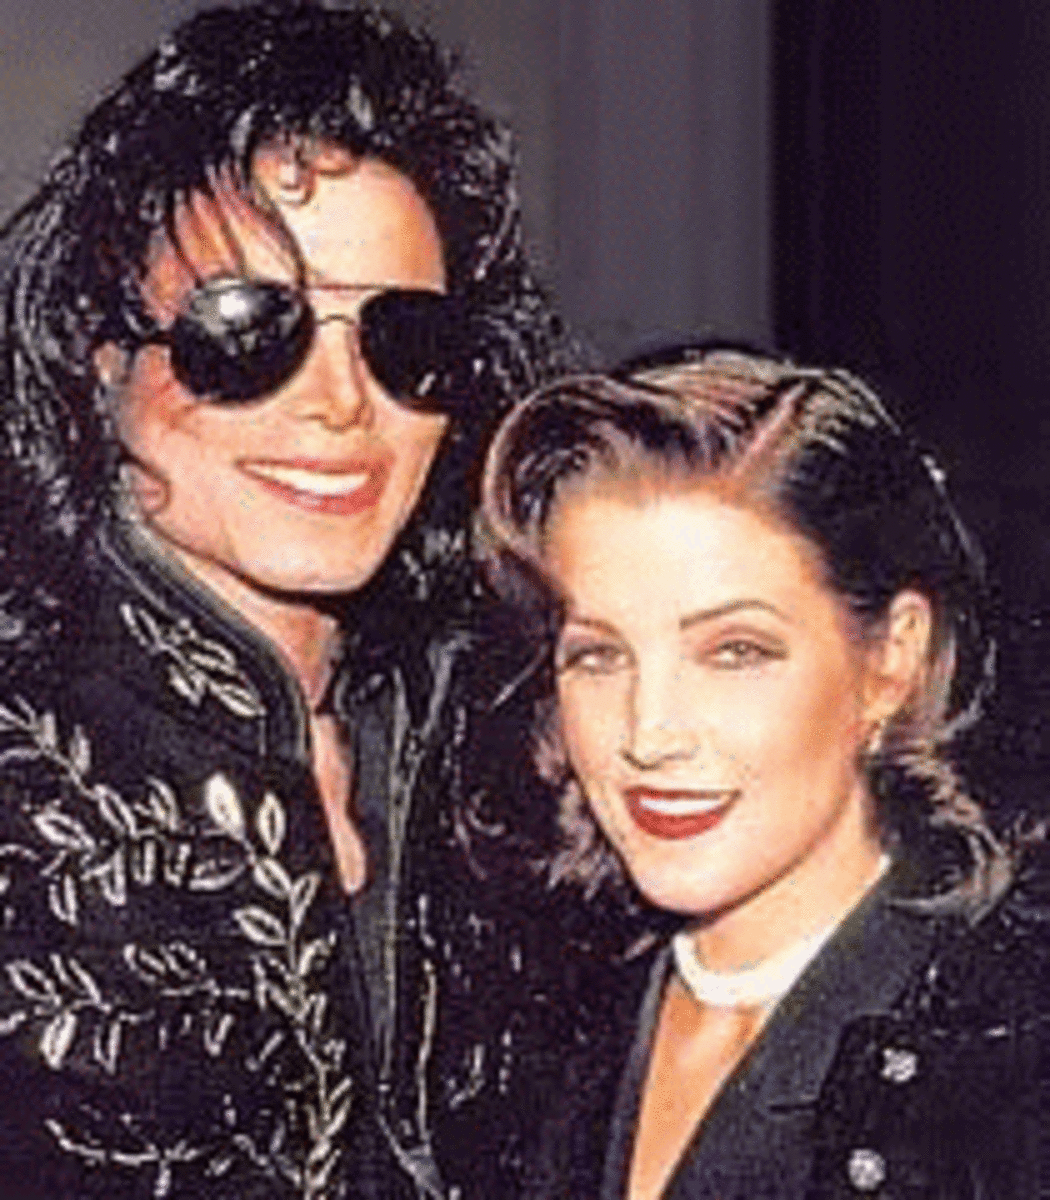 Michael and 1st wife Lisa Marie Presley